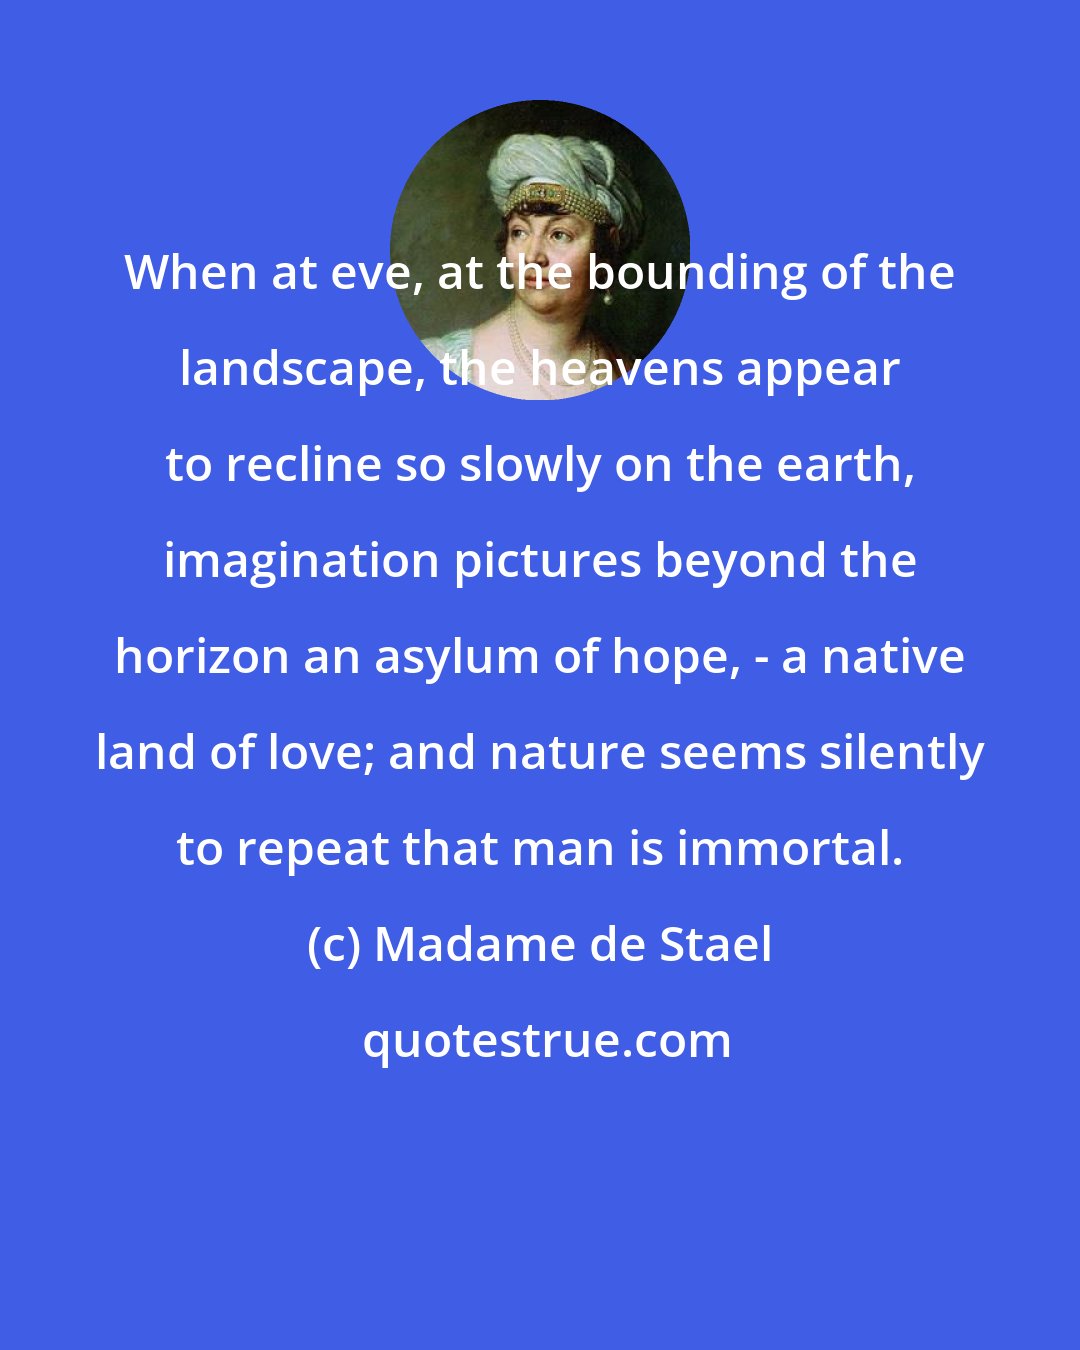 Madame de Stael: When at eve, at the bounding of the landscape, the heavens appear to recline so slowly on the earth, imagination pictures beyond the horizon an asylum of hope, - a native land of love; and nature seems silently to repeat that man is immortal.